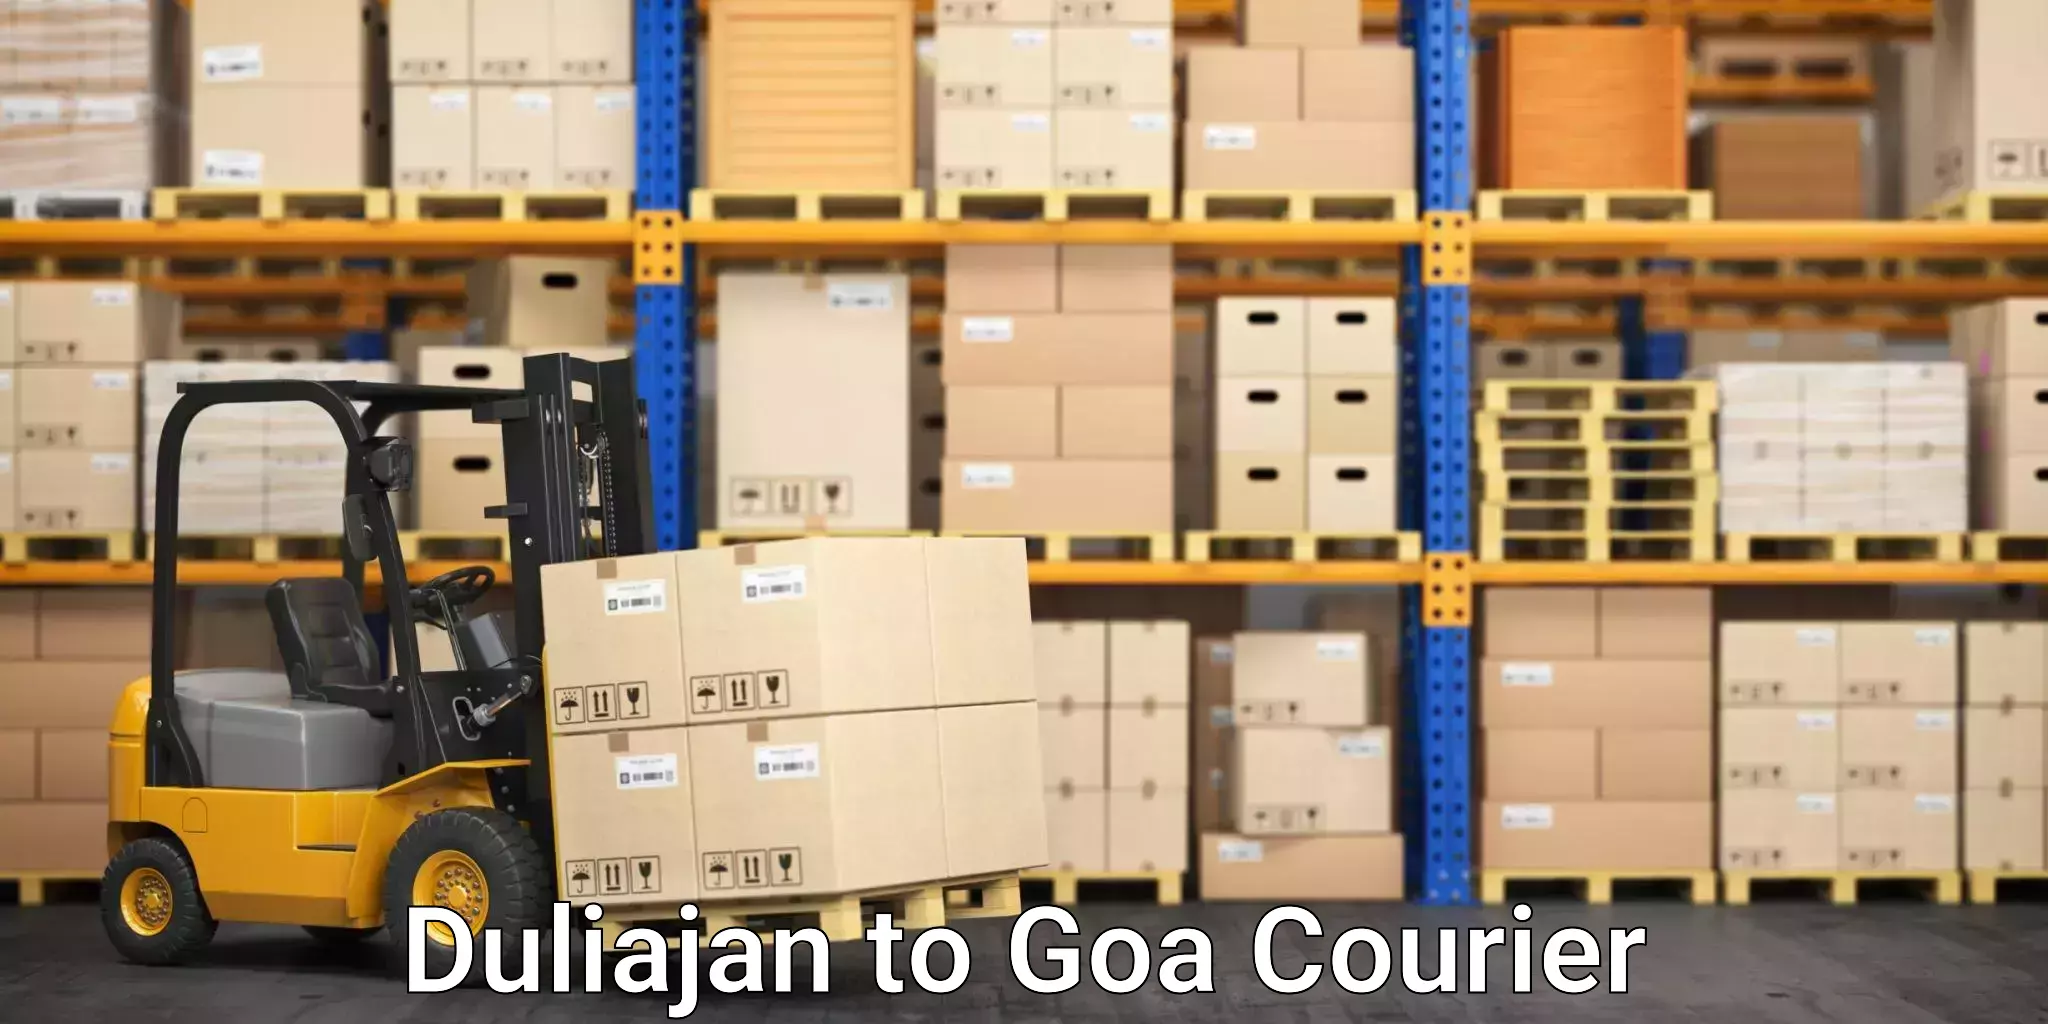 State-of-the-art courier technology Duliajan to Goa